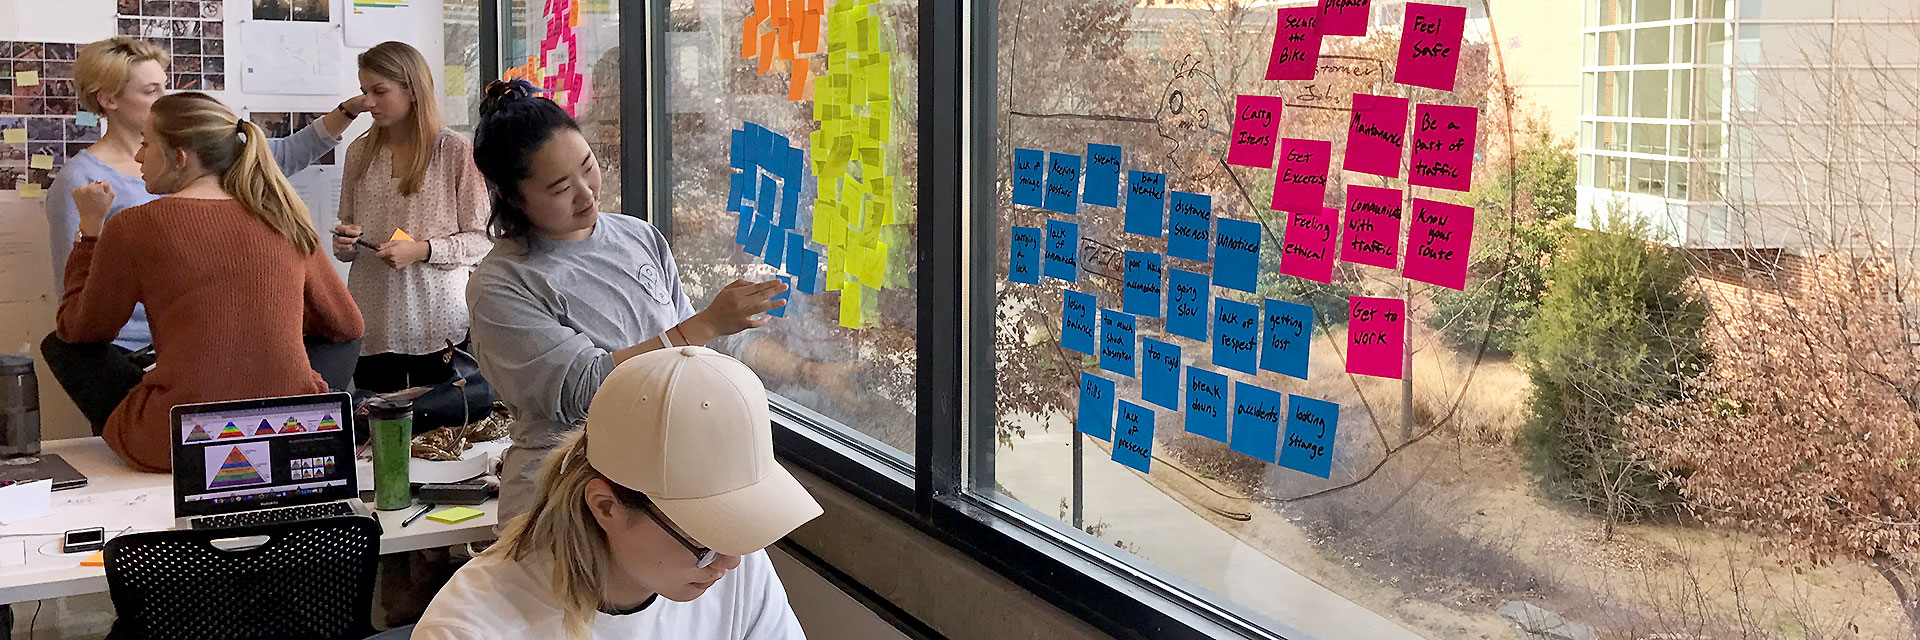 Industrial Design students learn ideation in our studios that overlook Midtown, Atlanta